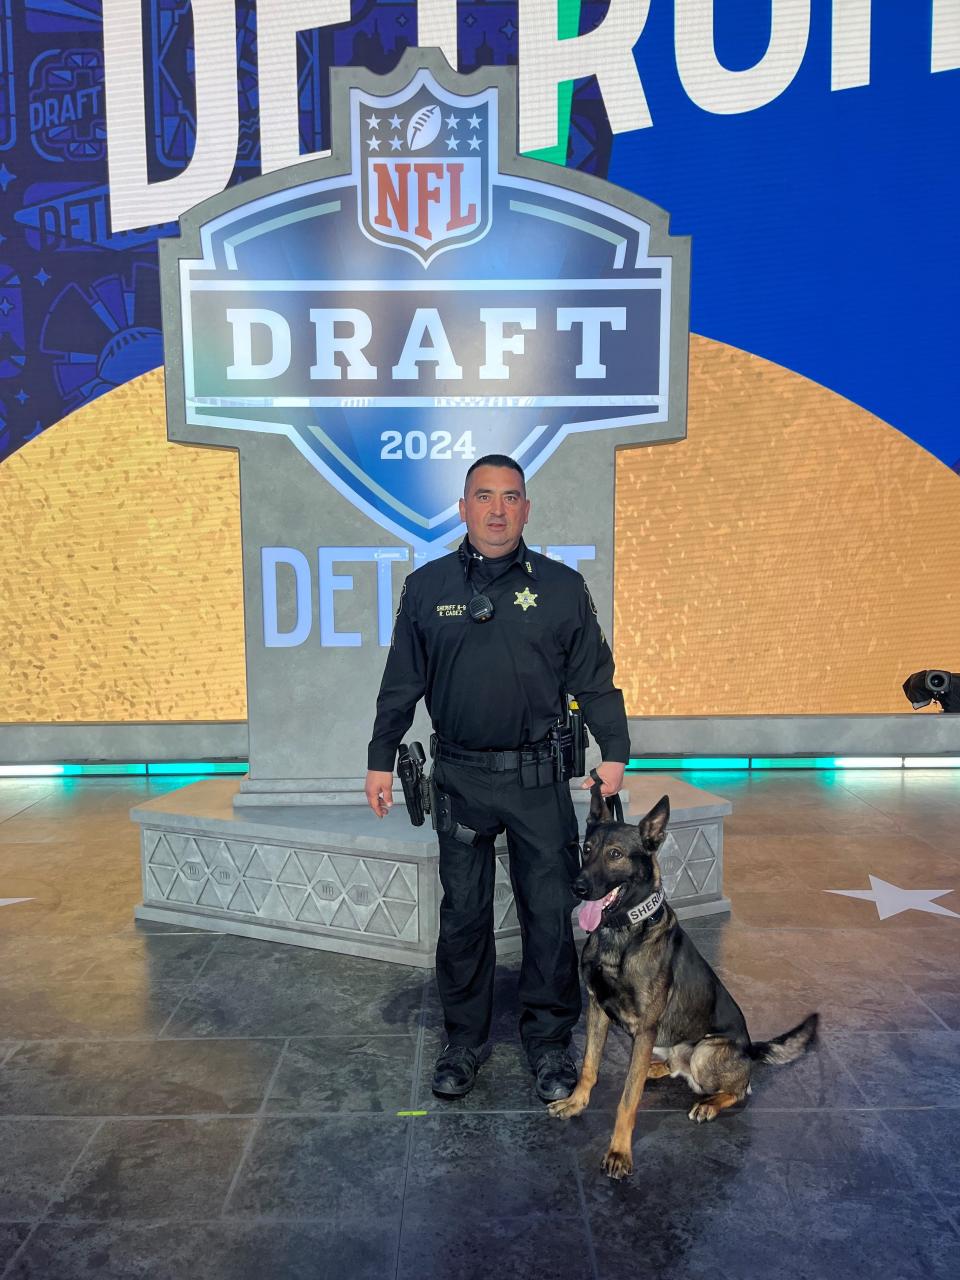 Cpl. Rick Cadez stands with his K9 partner Gunner at the 2024 NFL draft in Detroit in April. The two worked the draft April 25-27 doing mostly explosives detection.